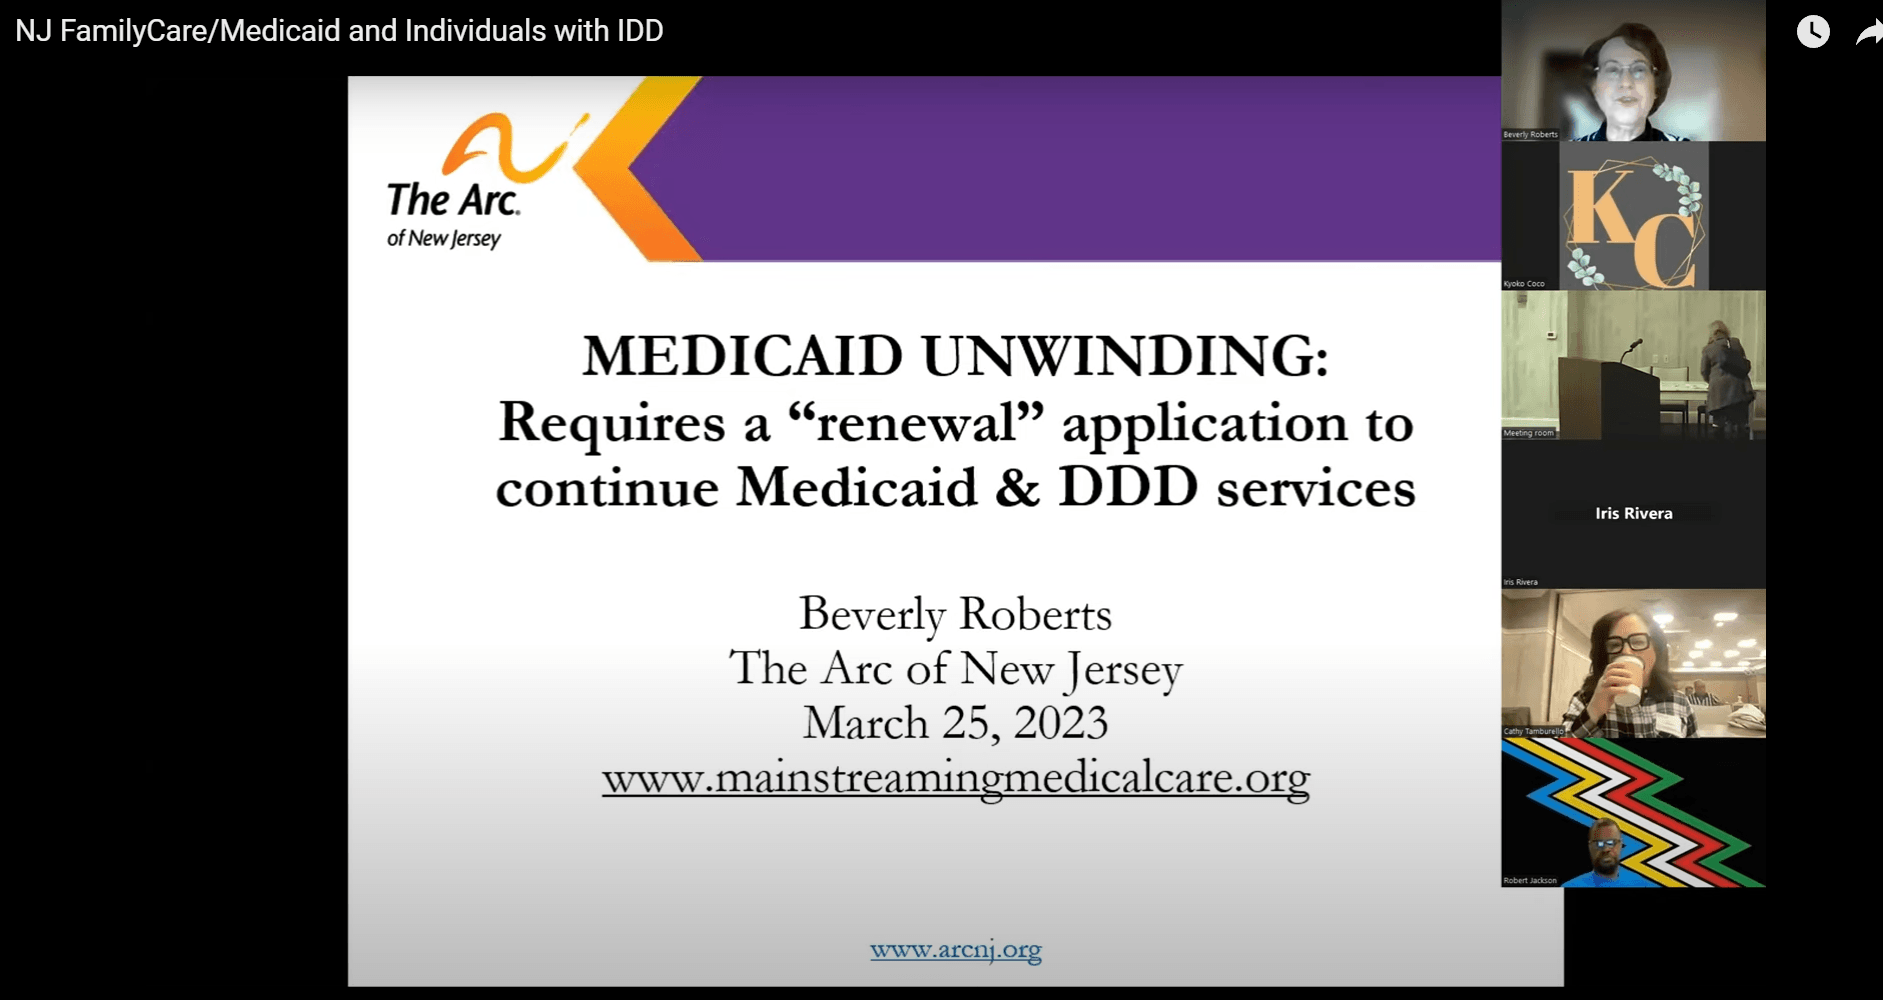 3/25/23 Webinar Recording: NJ FamilyCare/Medicaid and Individuals with IDD